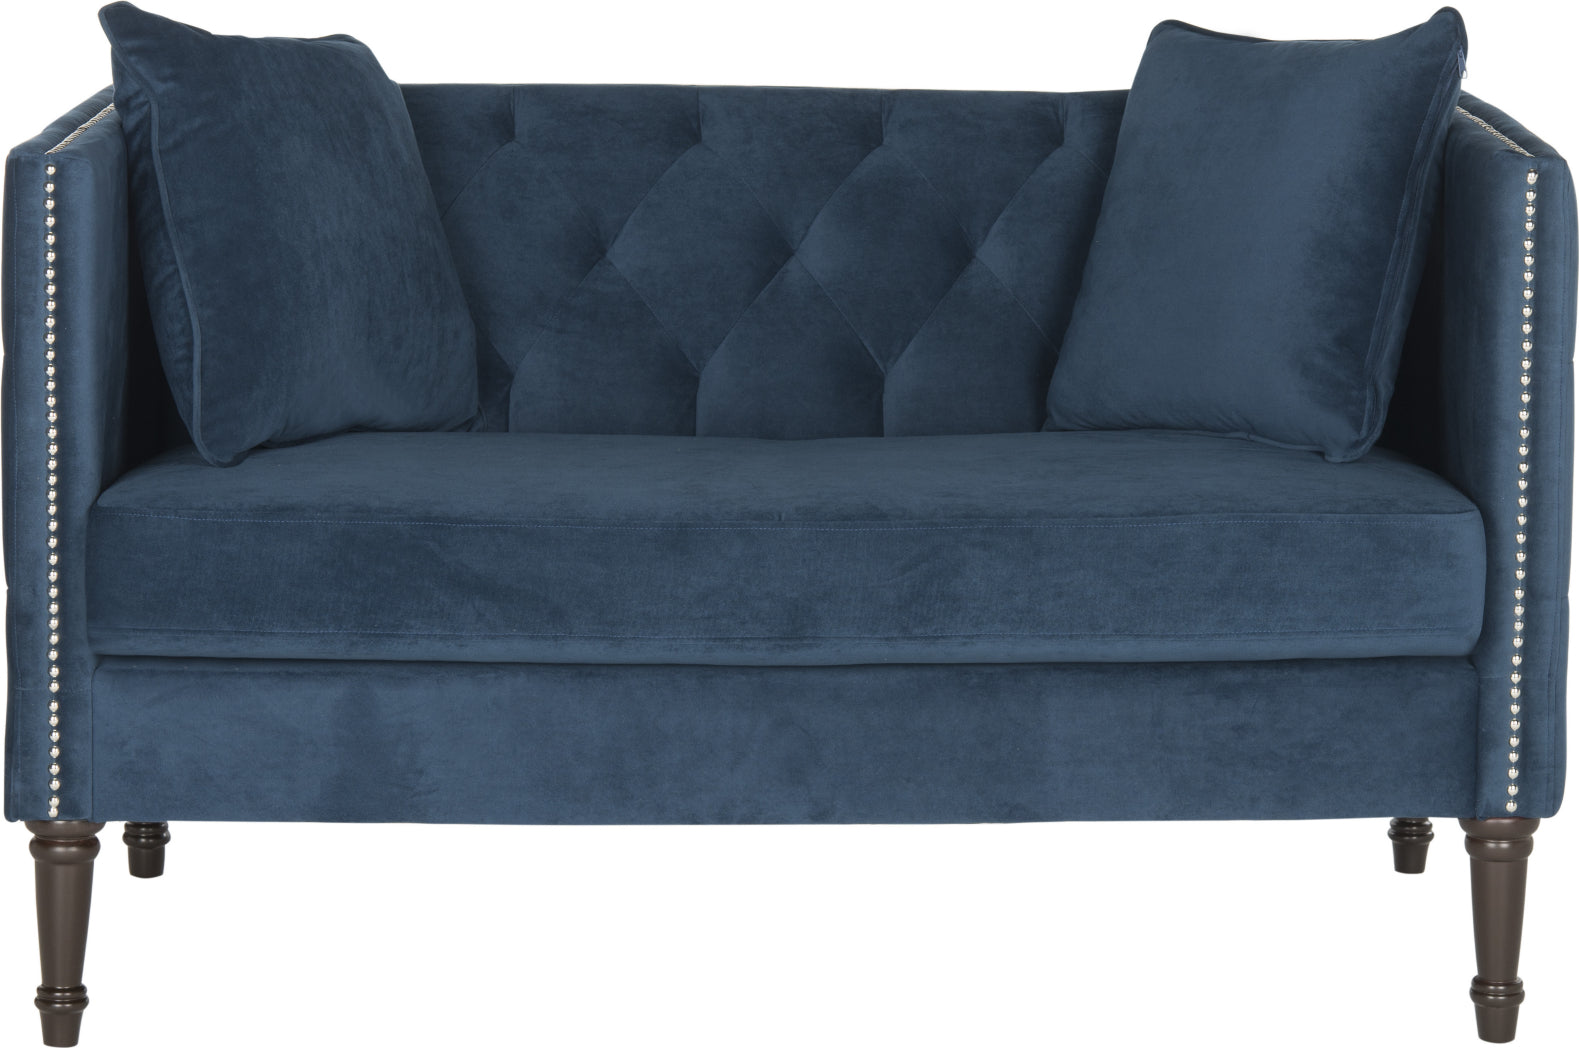 Safavieh Sarah Tufted Settee With Pillows Navy and Espresso Furniture main image